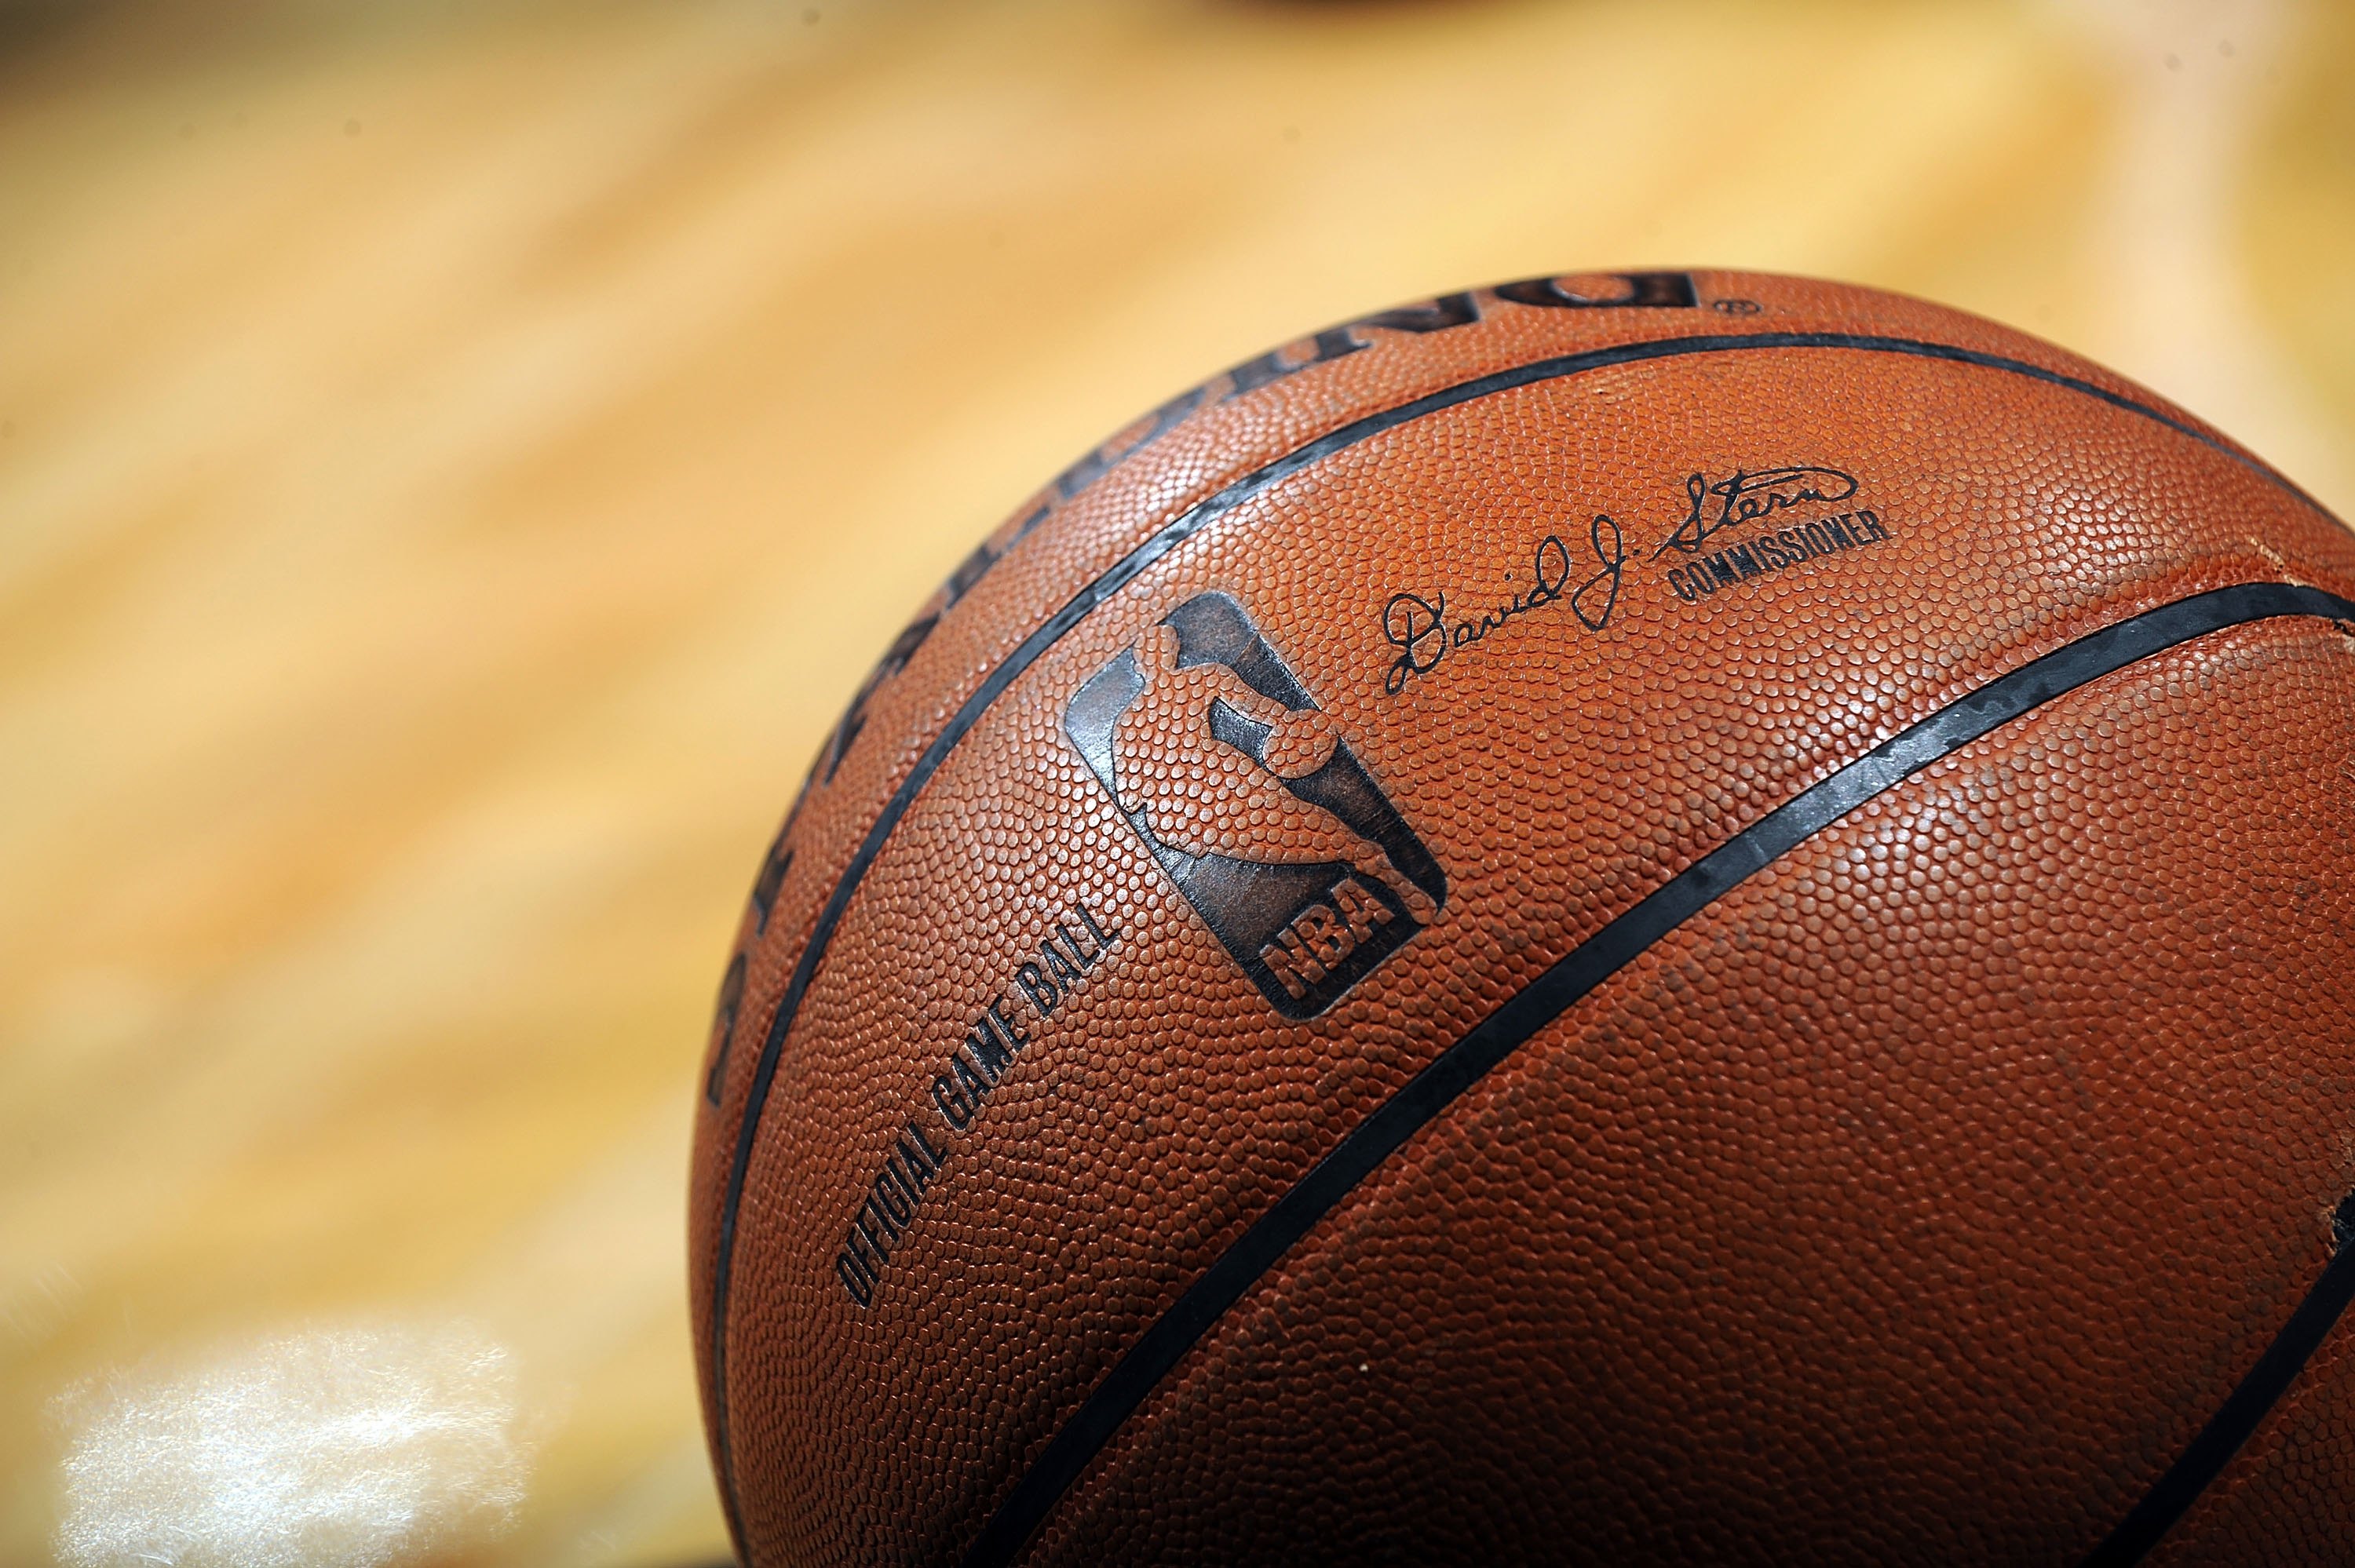 18 Former NBA Players Arrested For Reported $4M Welfare Fraud Scheme